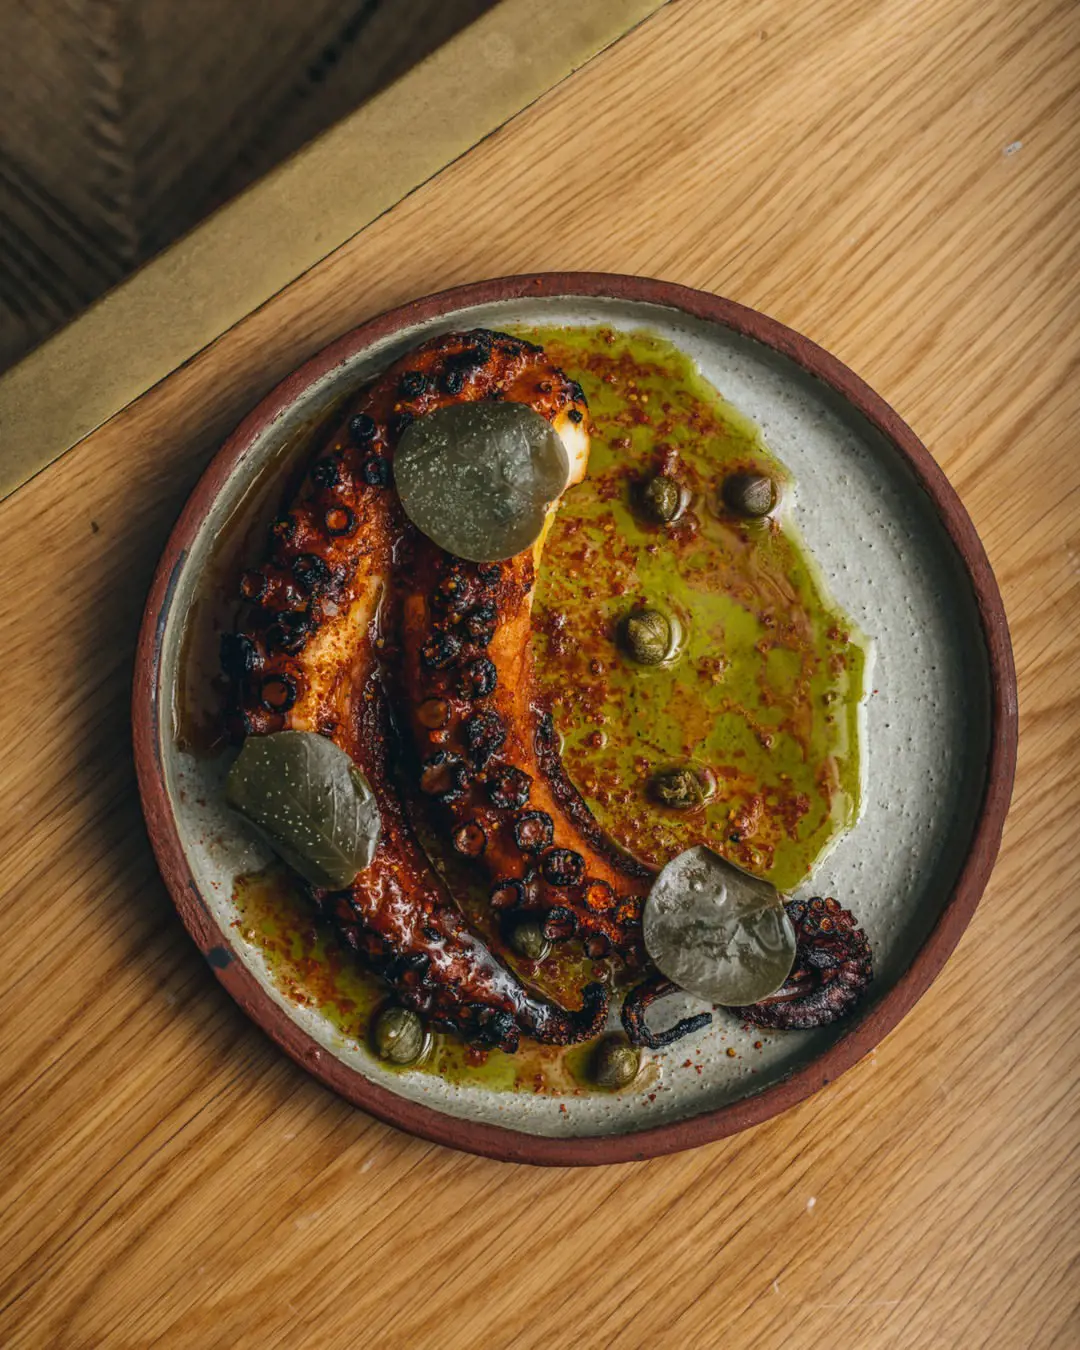 Octopus with olive oil, sherry vinegar, caper leaves.